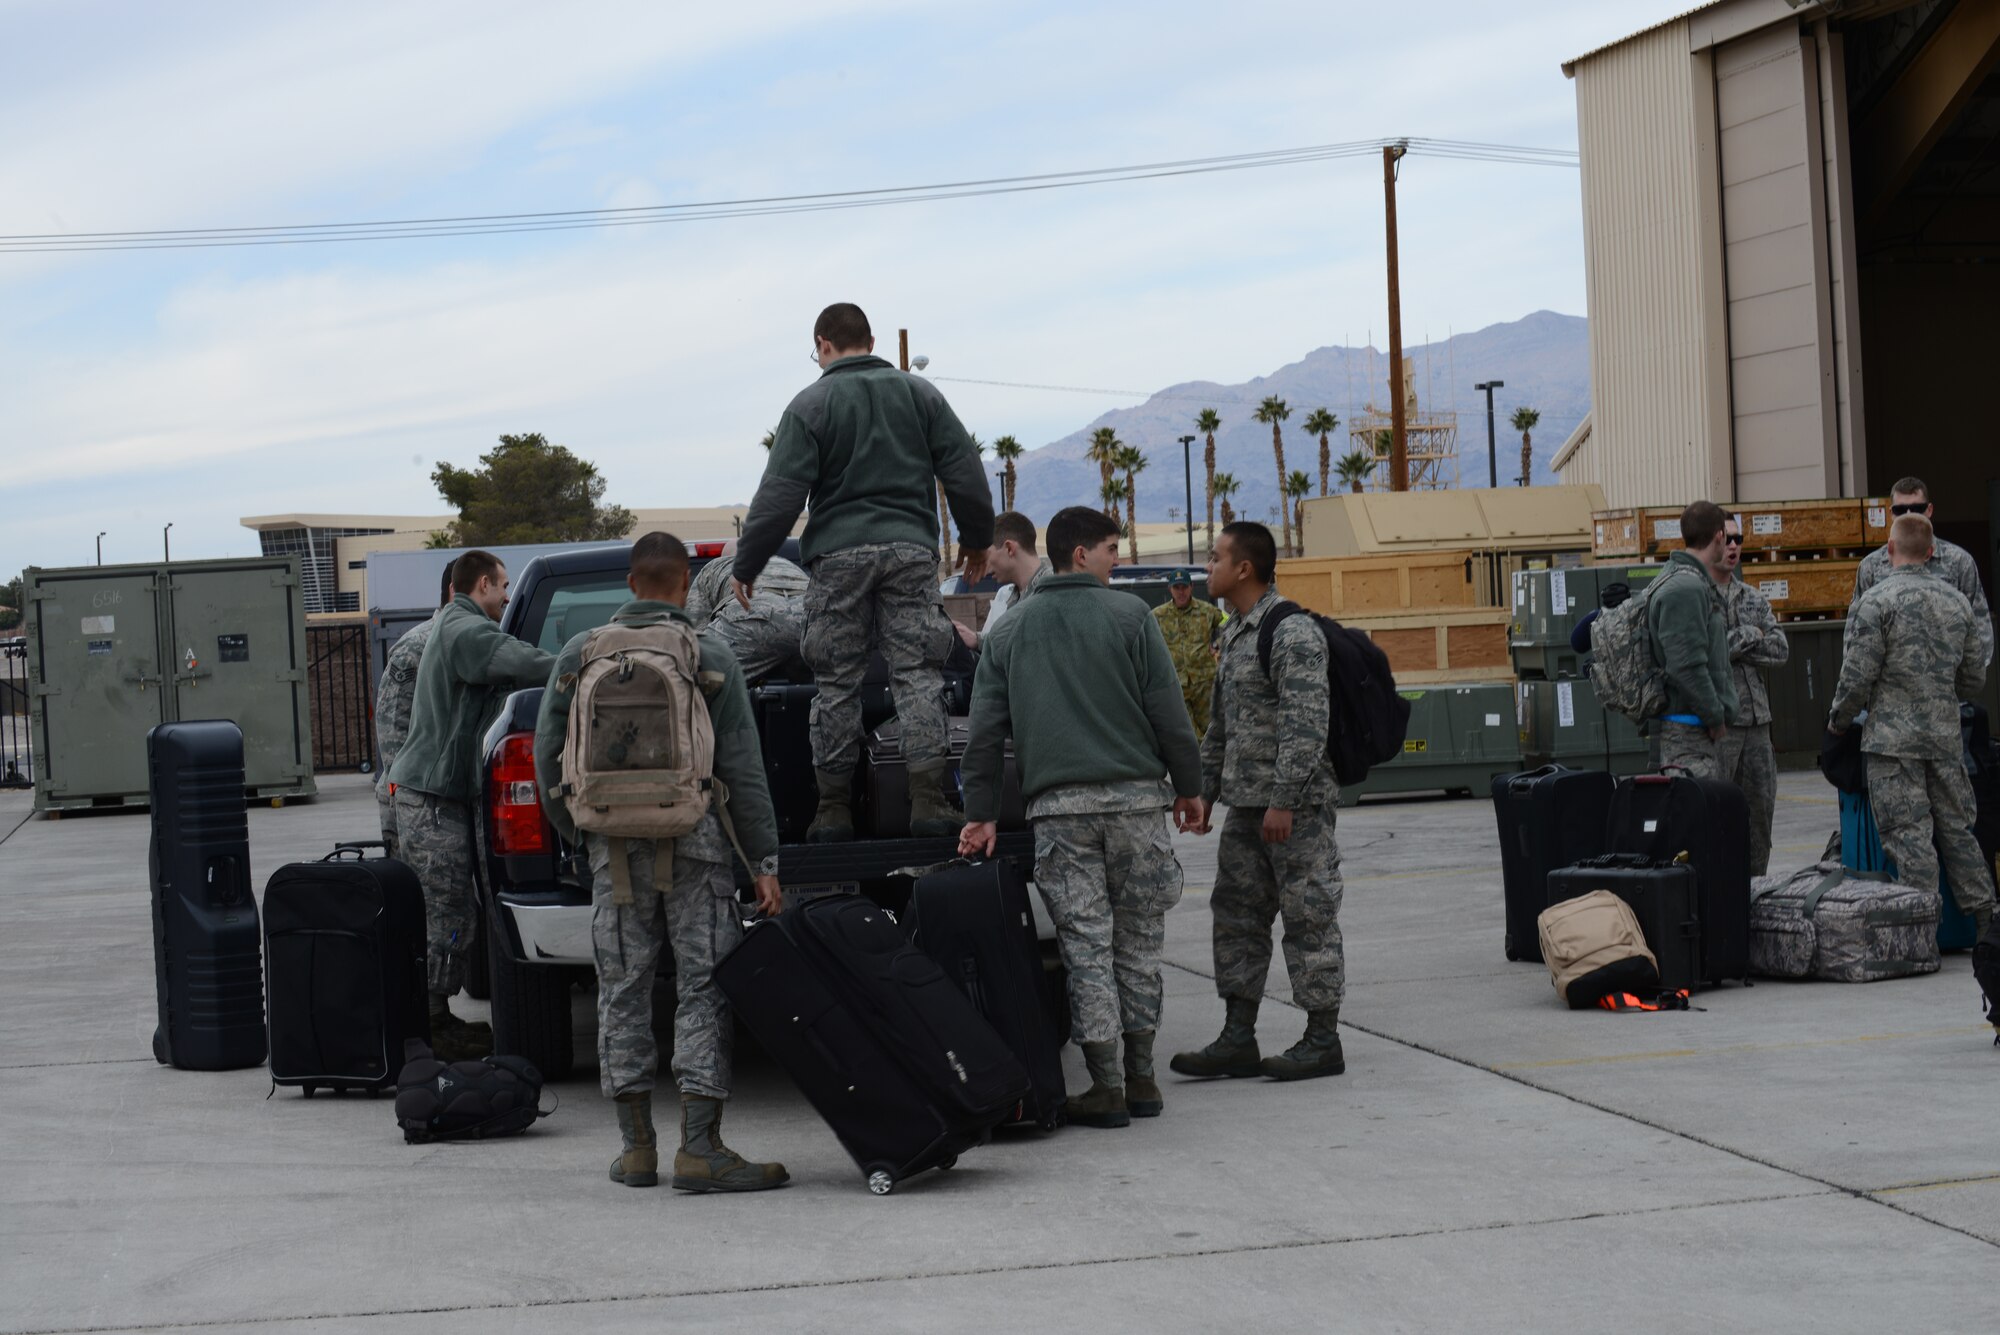 Airmen from the 366th Fighter Wing load luggage onto a truck Jan. 23, 2013, at Nellis Air Force Base, Nev. The Airmen are stationed at Mountain Home Air Force Base, Idaho, and are here participating in Red Flag 14-1. (U.S. Air Force photo by Senior Airman Benjamin Sutton/Released)